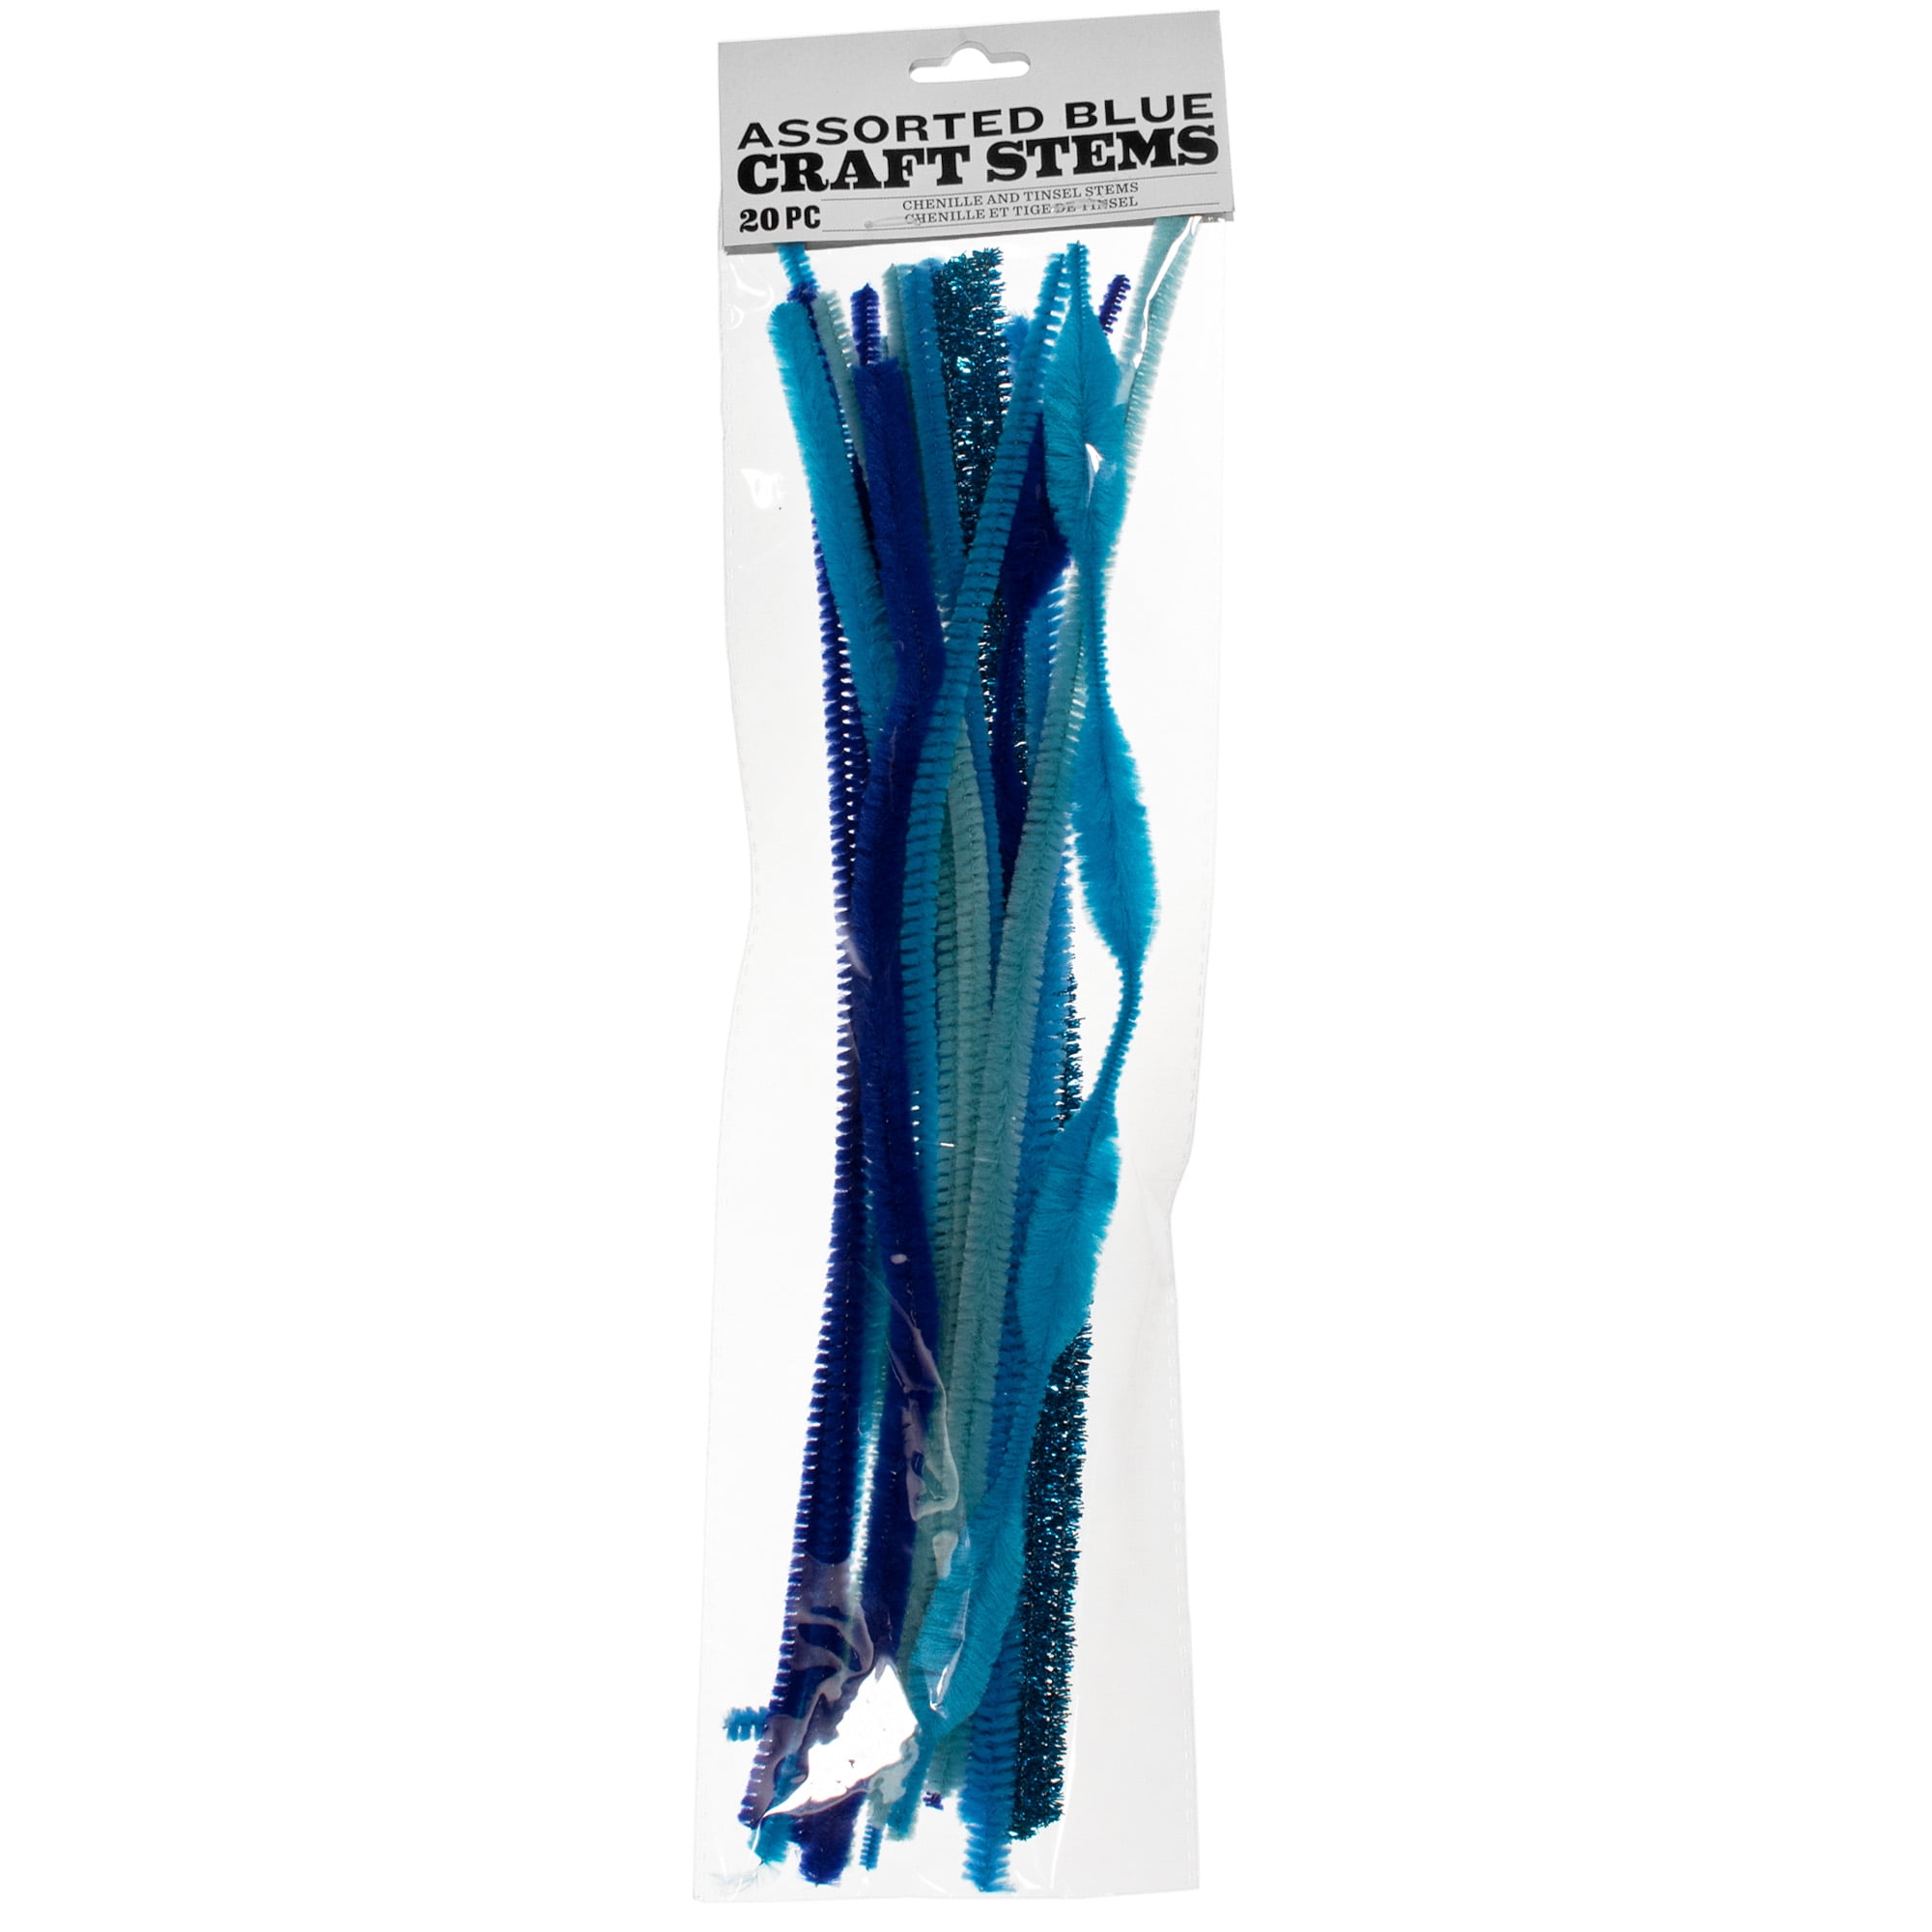 150 metallic silver Pipe Cleaners Craft Chenille Stems – BLUE SQUID USA